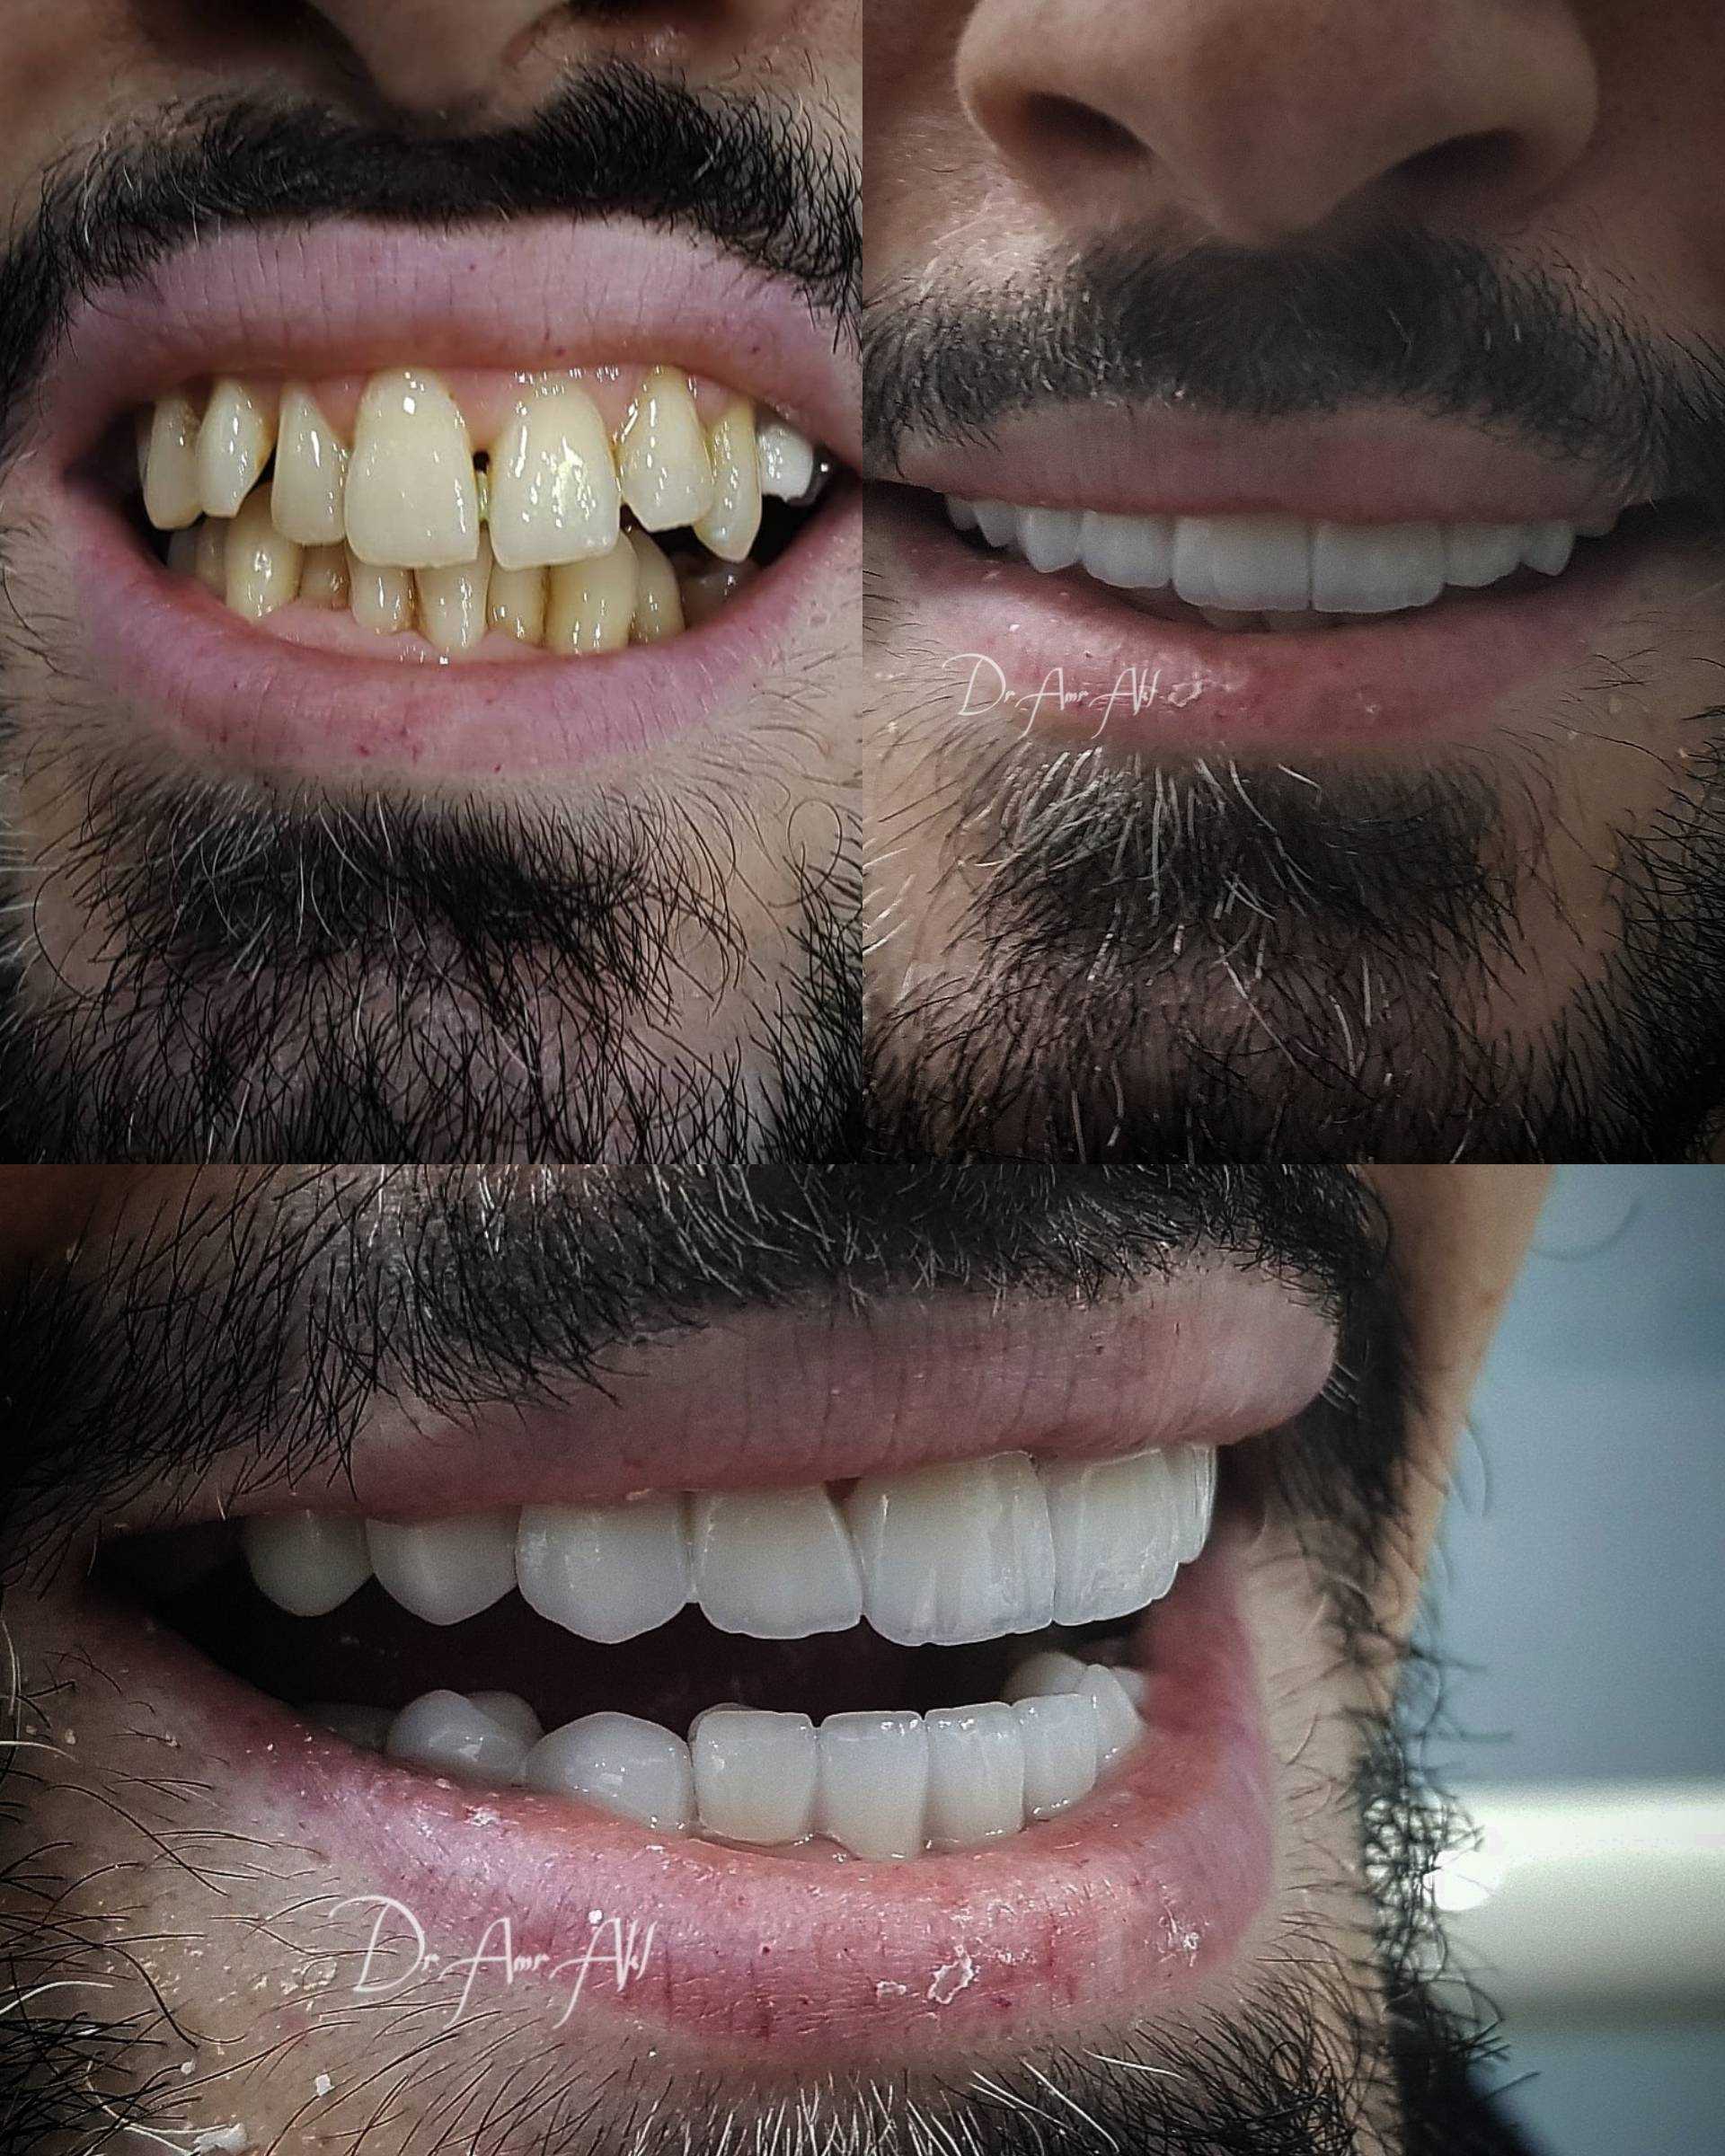 Image Gallary  Dr Albert wahib   Smile and Shine Dental clinic